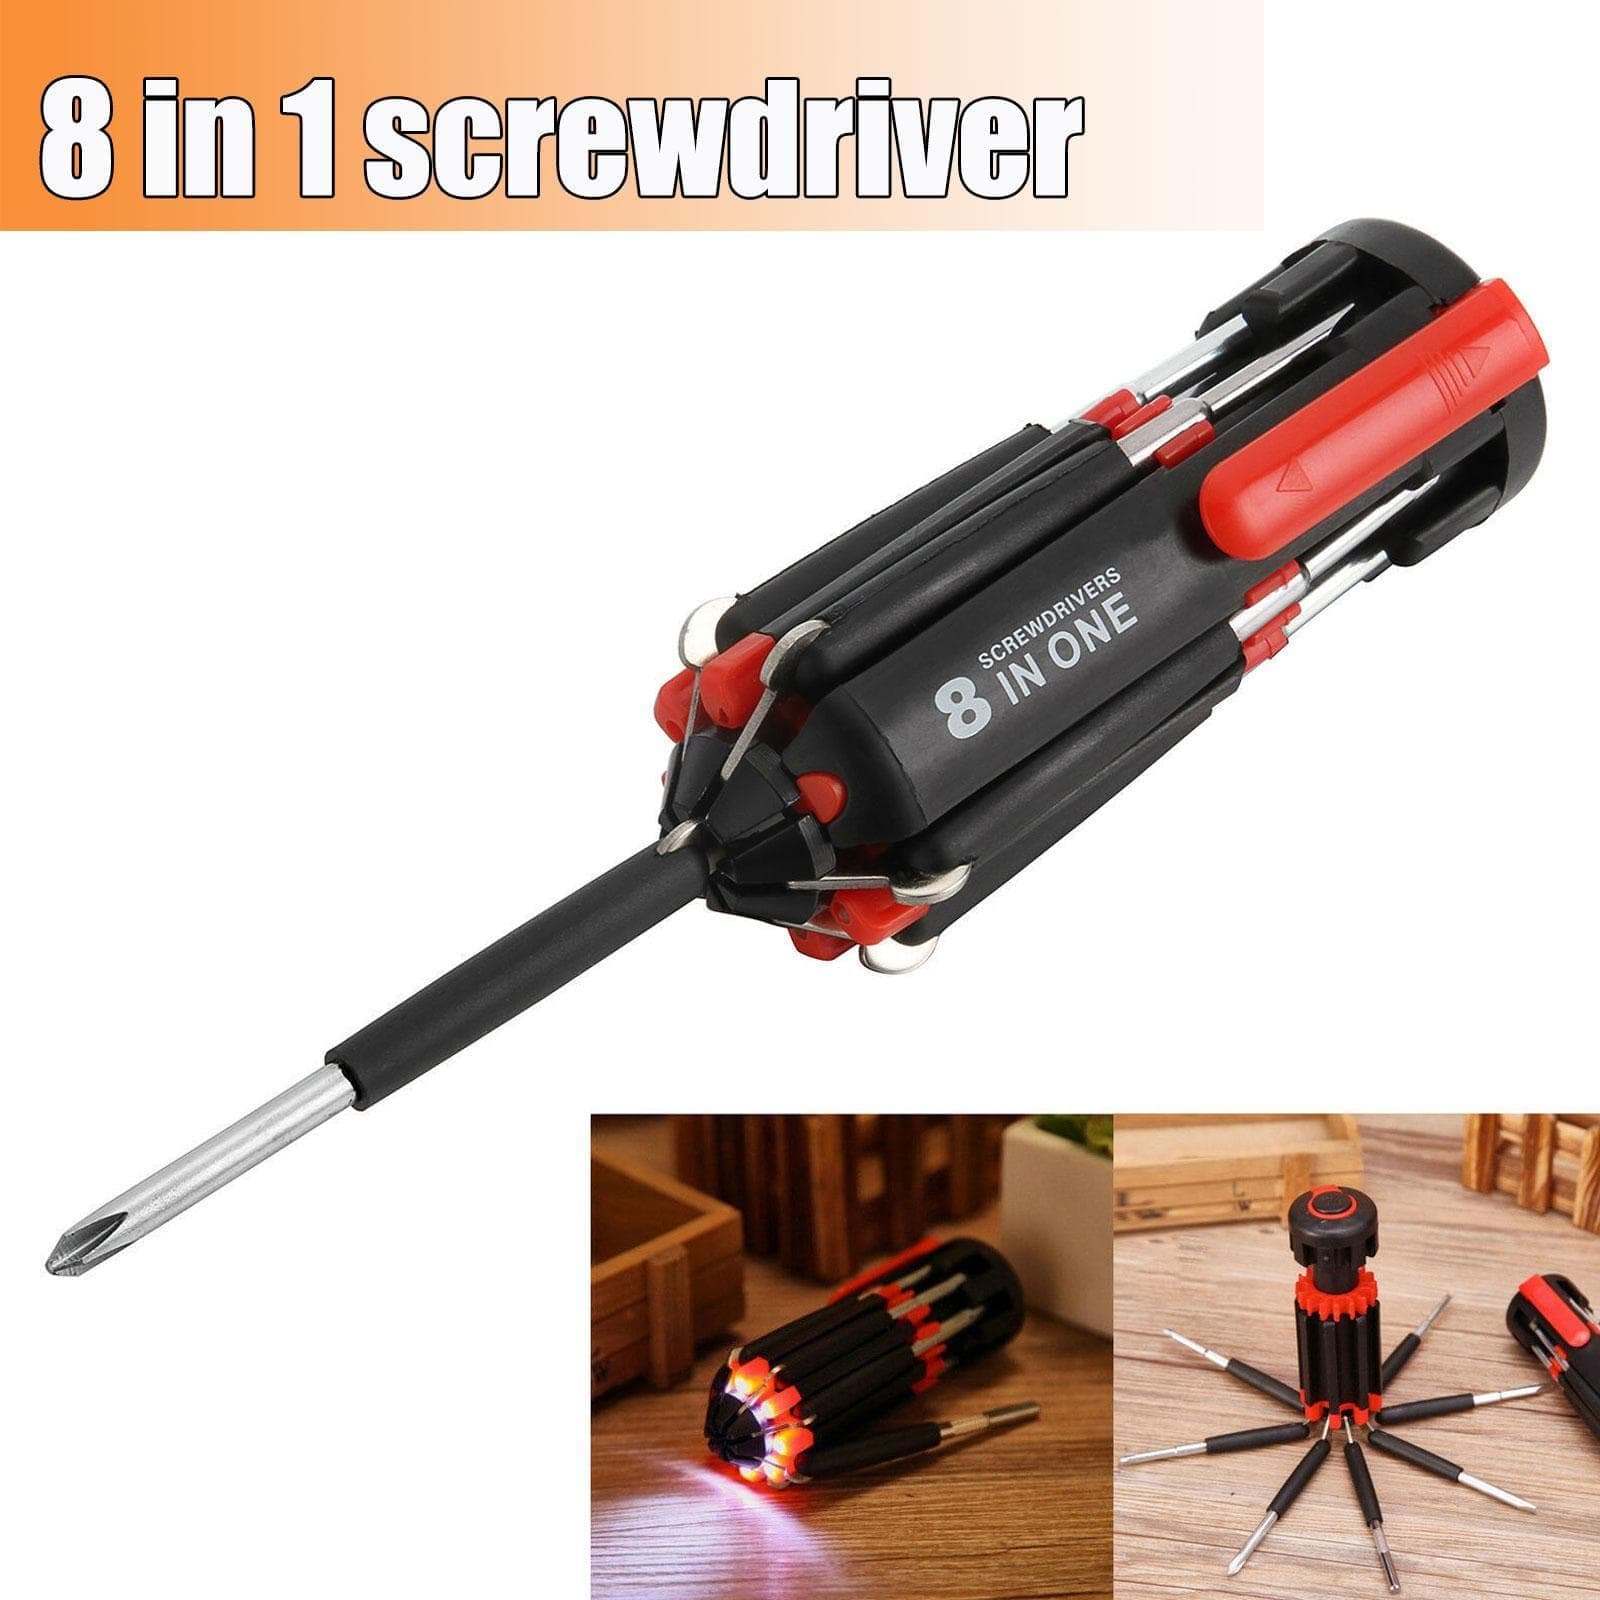 eszy2find muliti screwdrivers Car Supplies 8 In 1 Screwdriver With LED Flashlight Car Portable Multifunctional Outdoor Tools